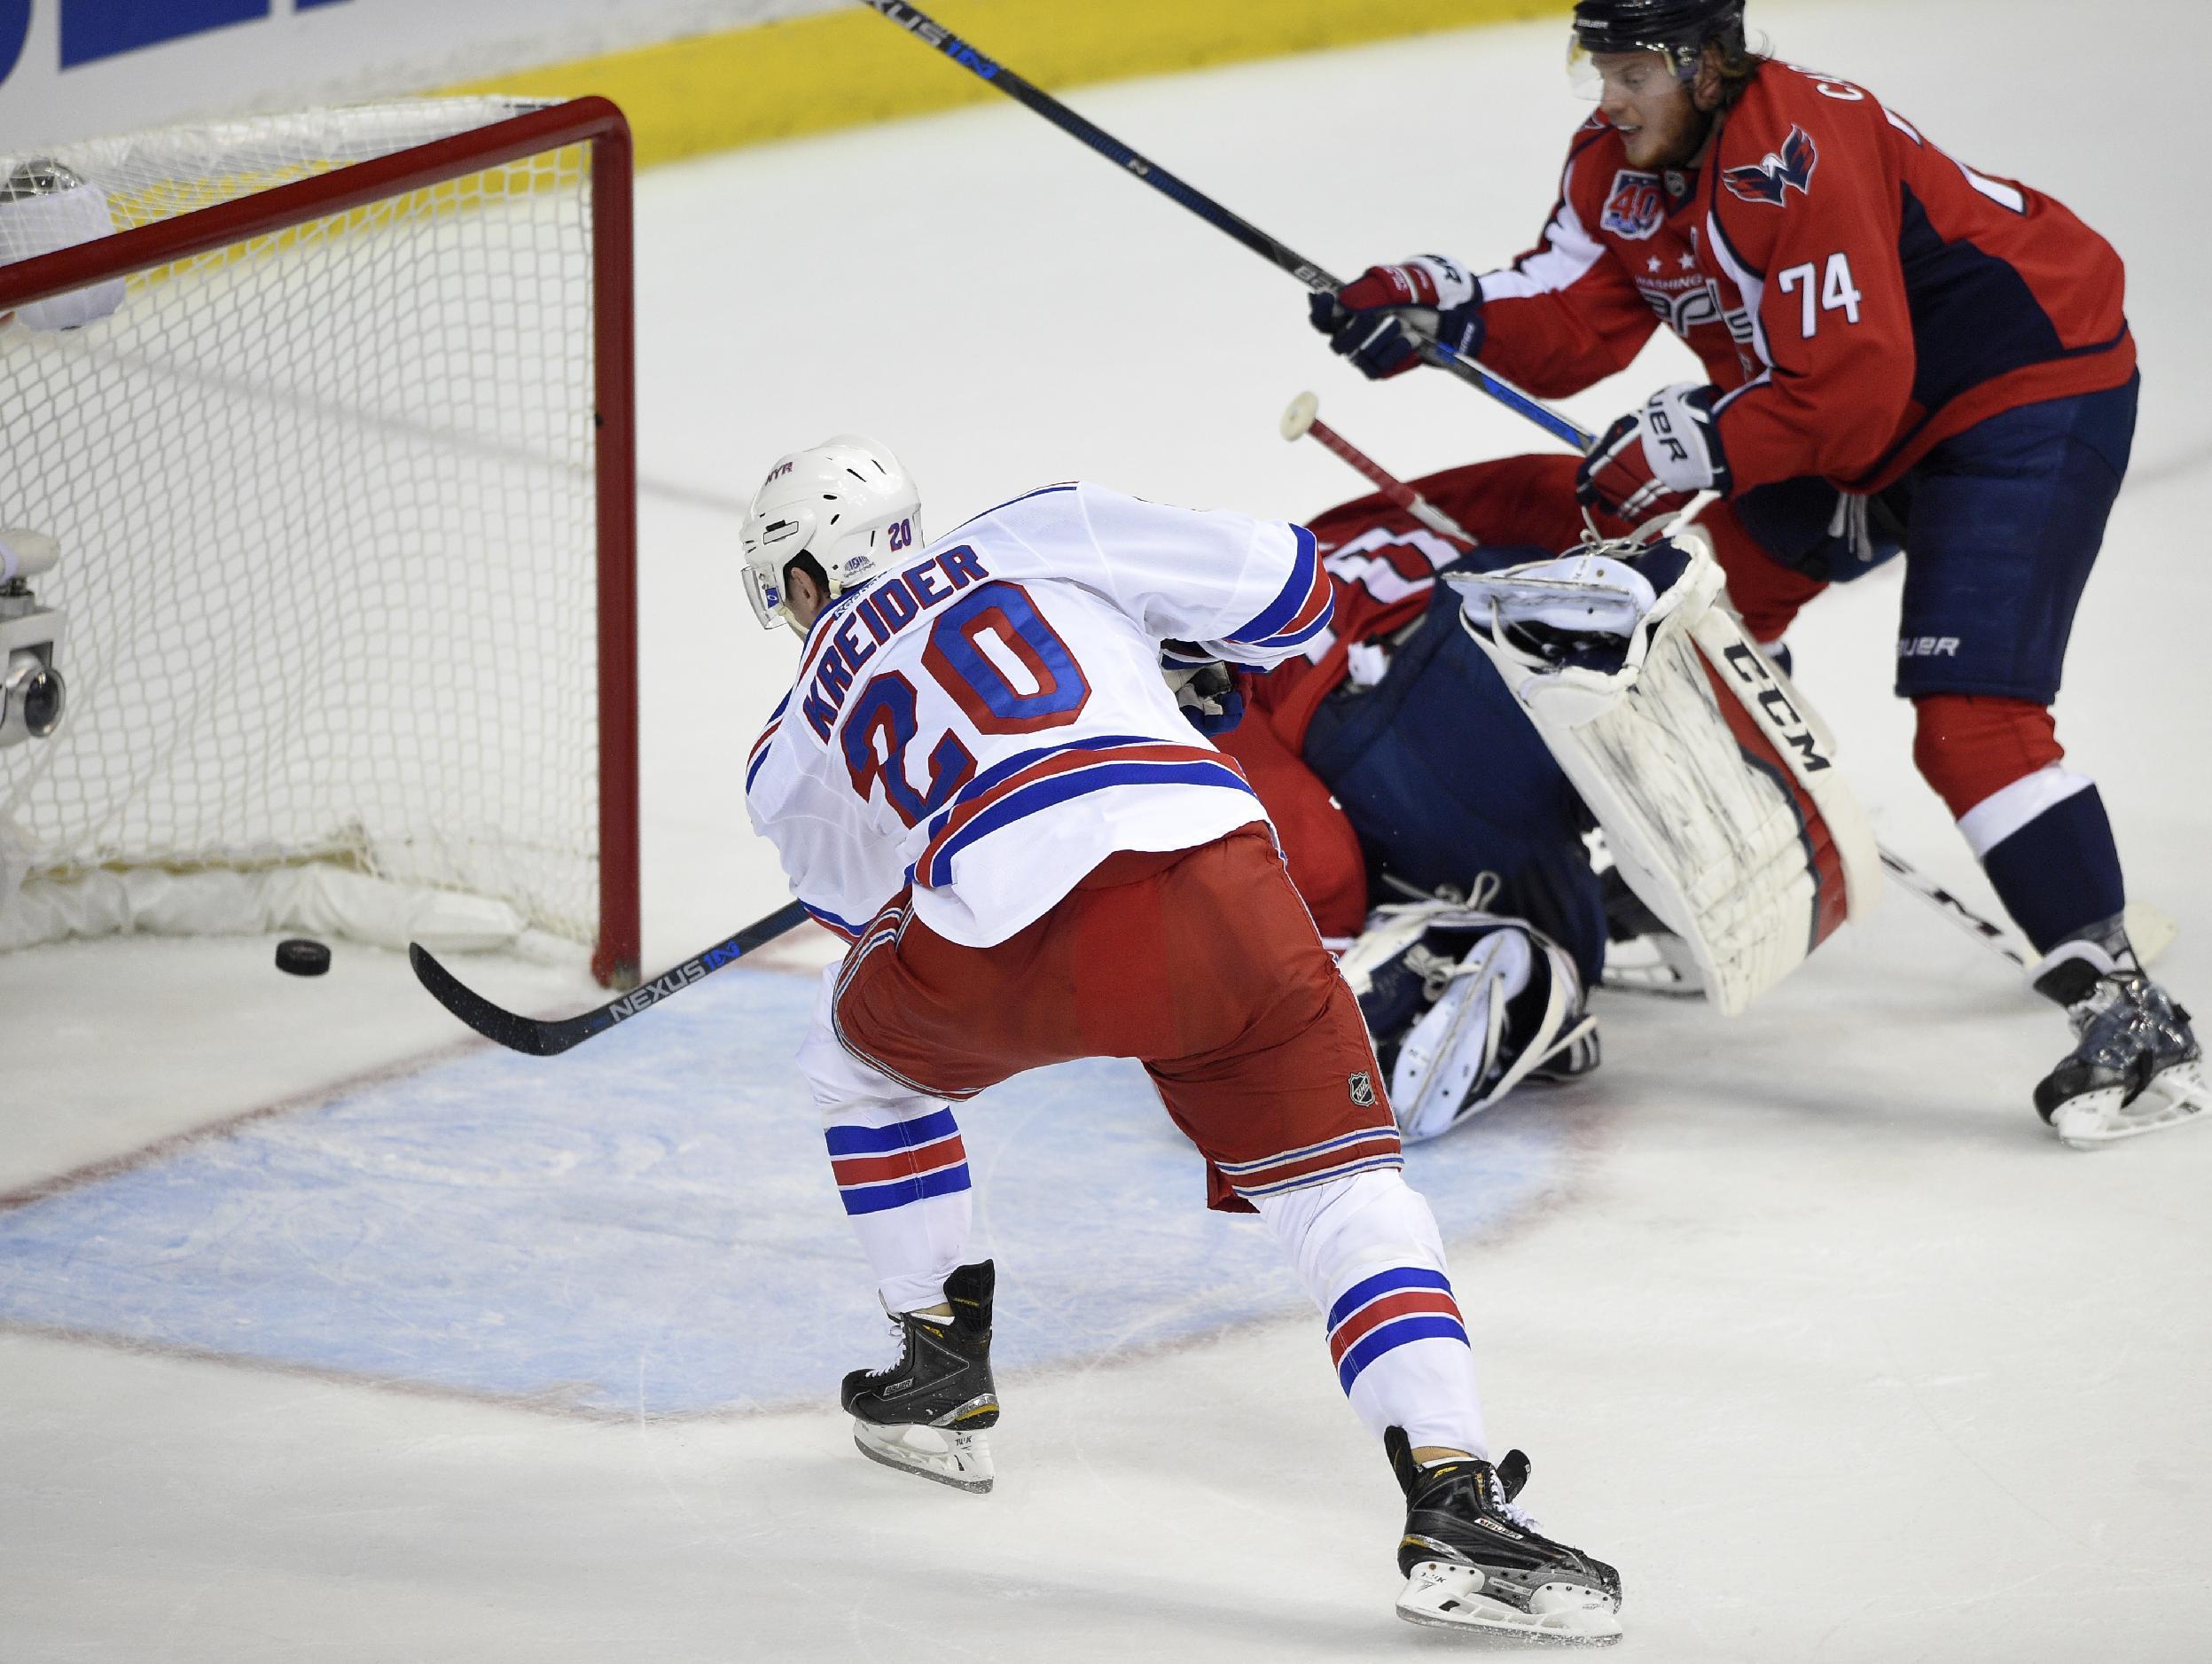 New York Rangers left wing Chris Kreider (20) scores his second goal of the period during the first period past Washington Capitals goalie Braden Holtby (70), center, and John Carlson (74) in Game 6 in the second round of the NHL Stanley Cup hockey playoffs, Sunday, May 10, 2015, in Washington. (AP Photo/Nick Wass)